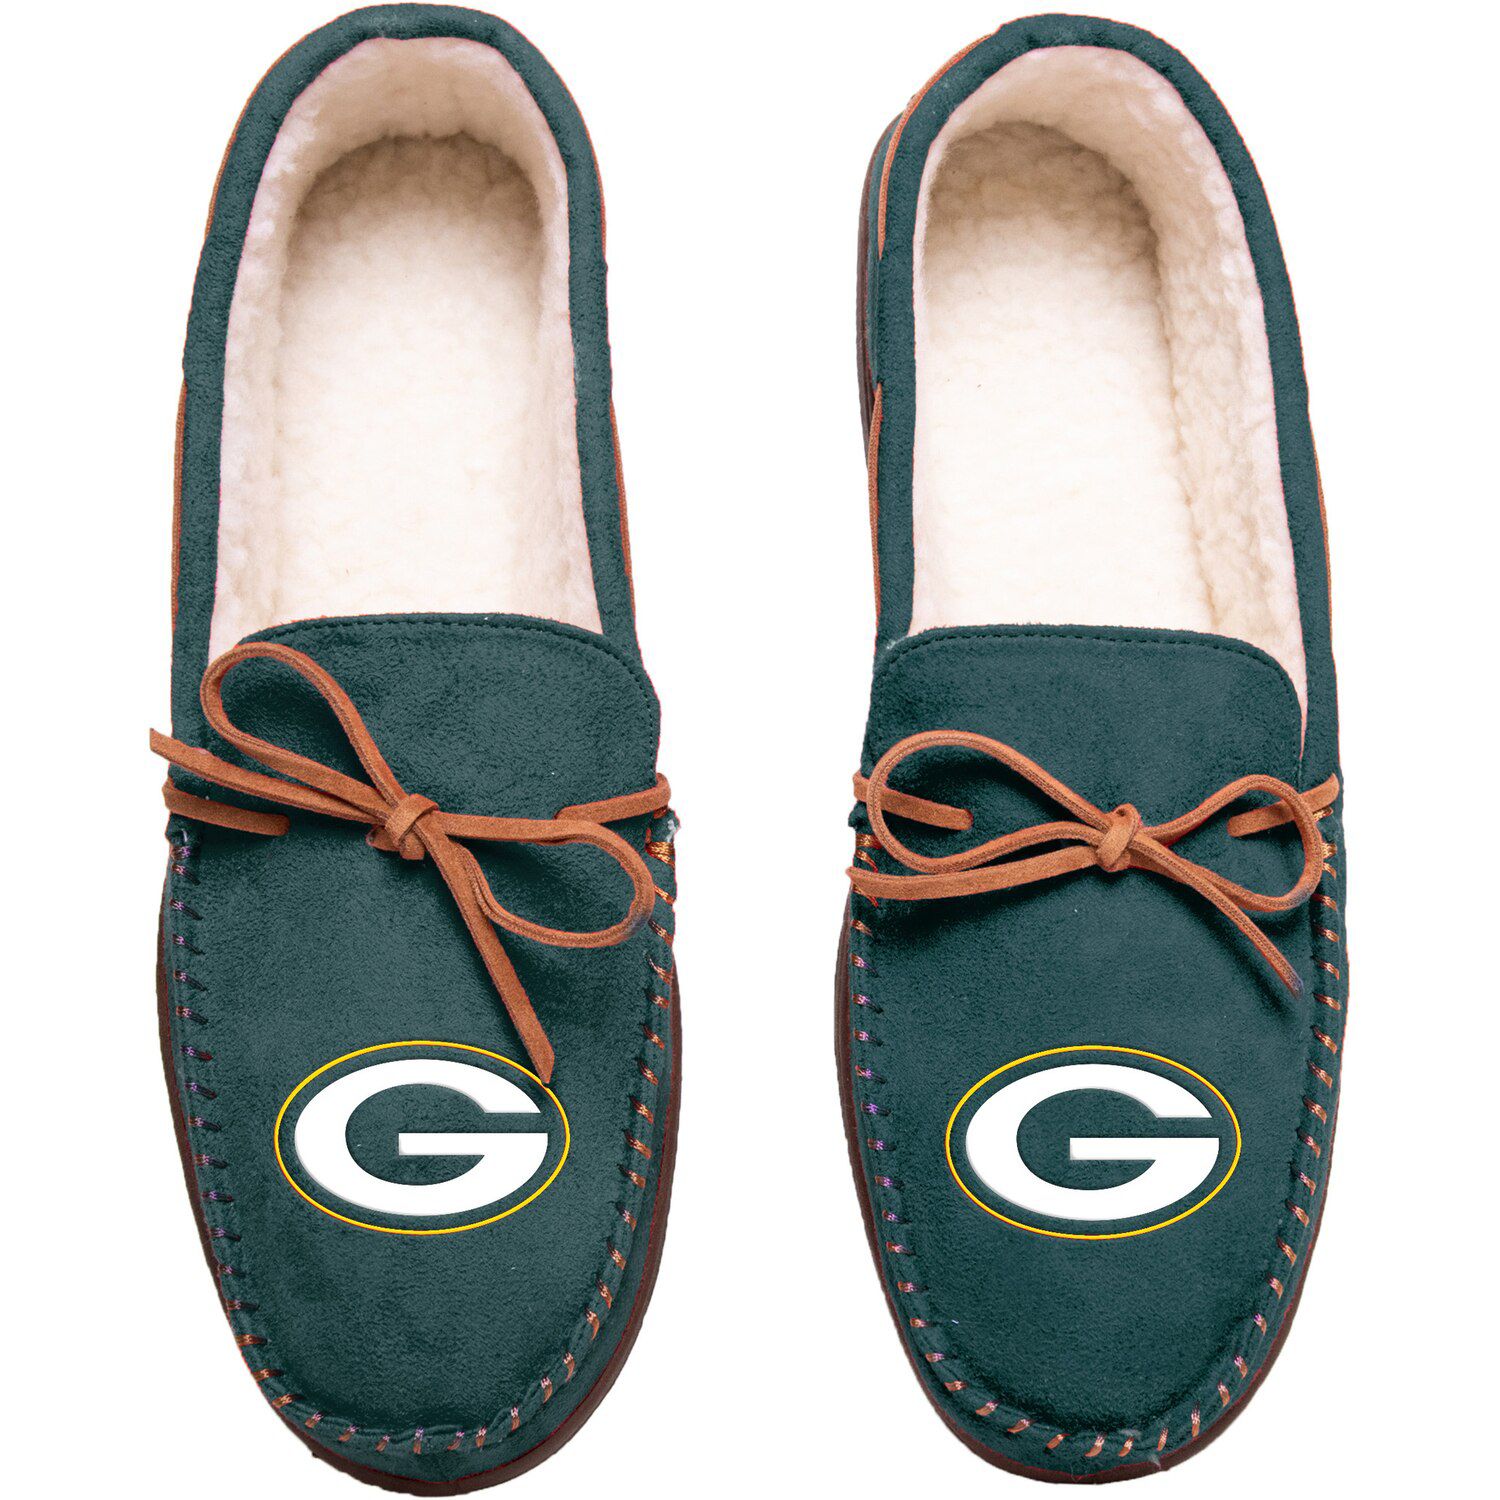 the bay mens slippers